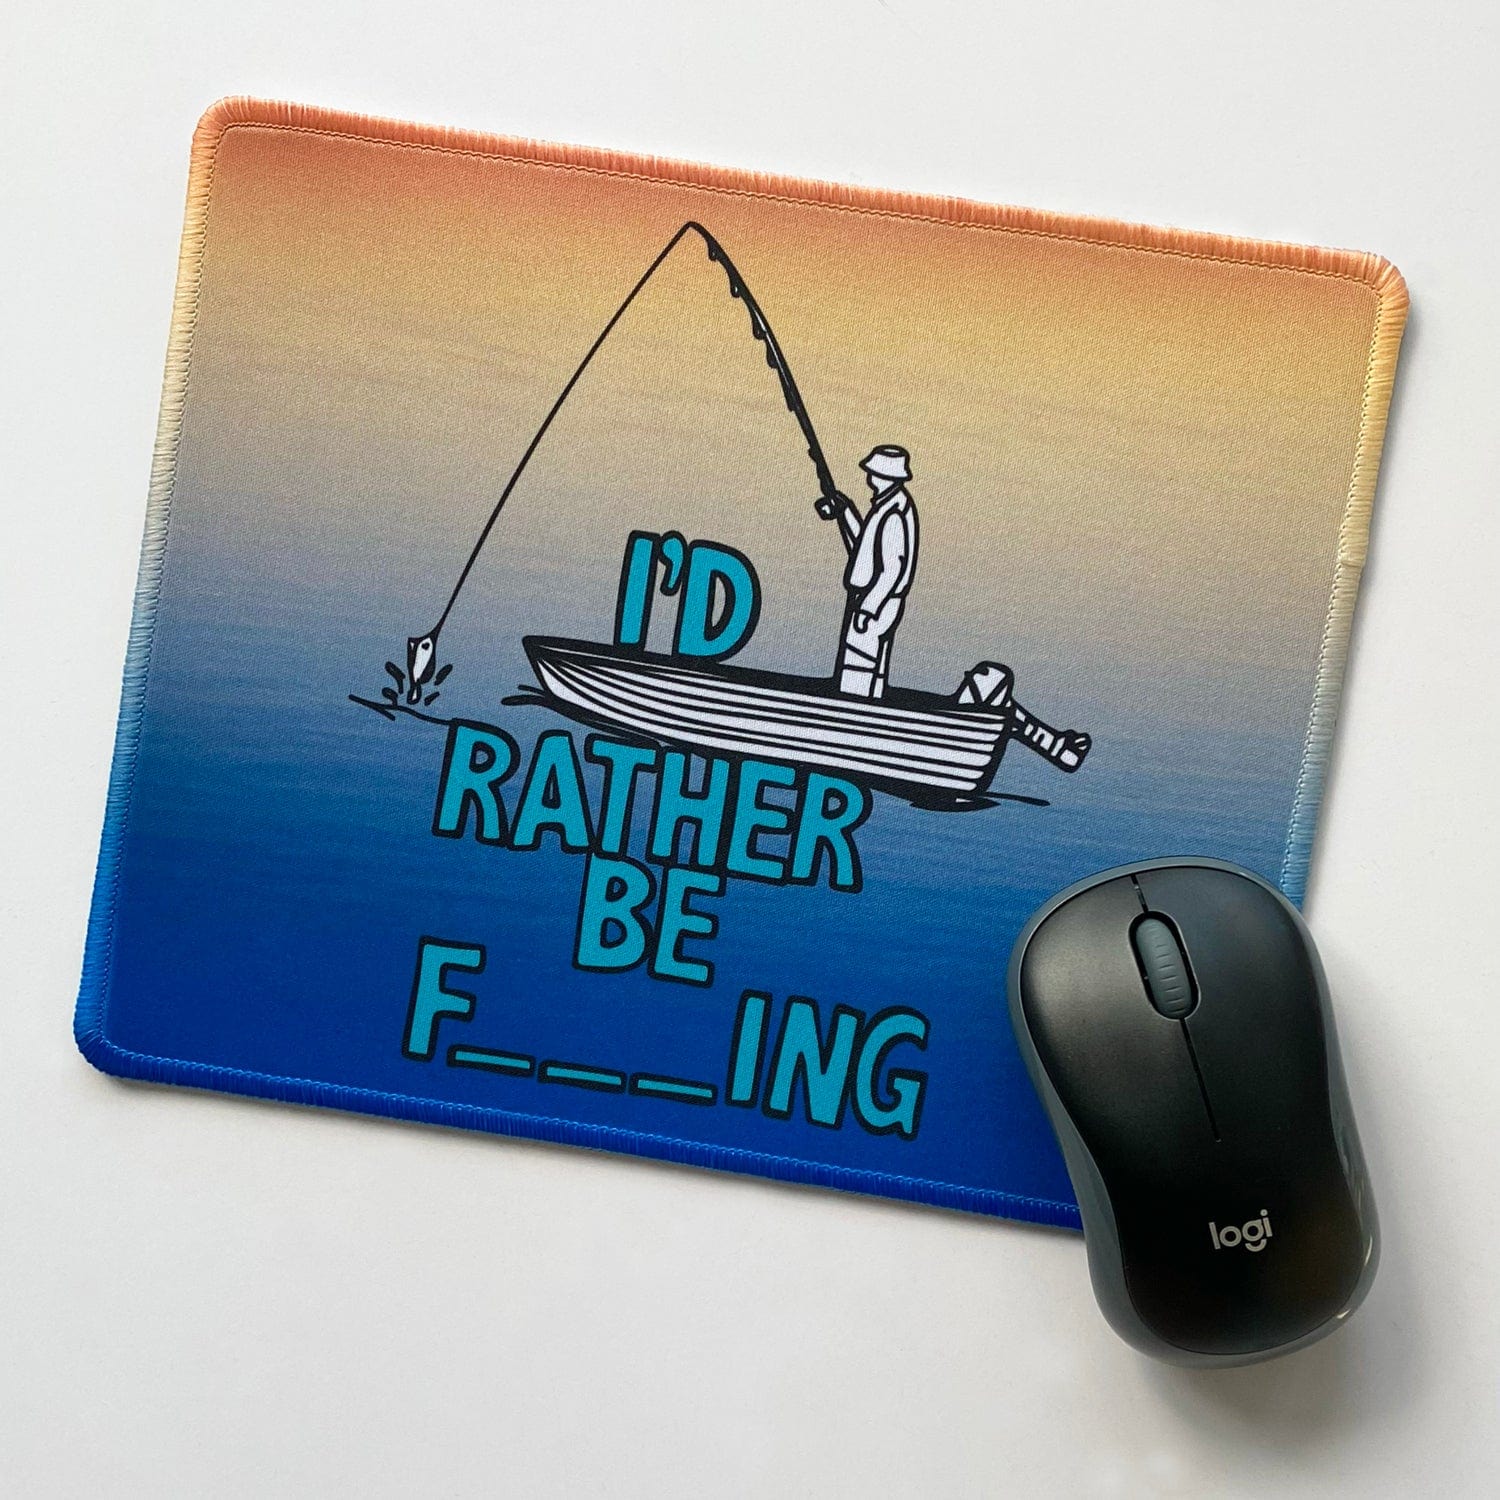 Rather Be Fishing 🐟🍆 - Mouse Pad